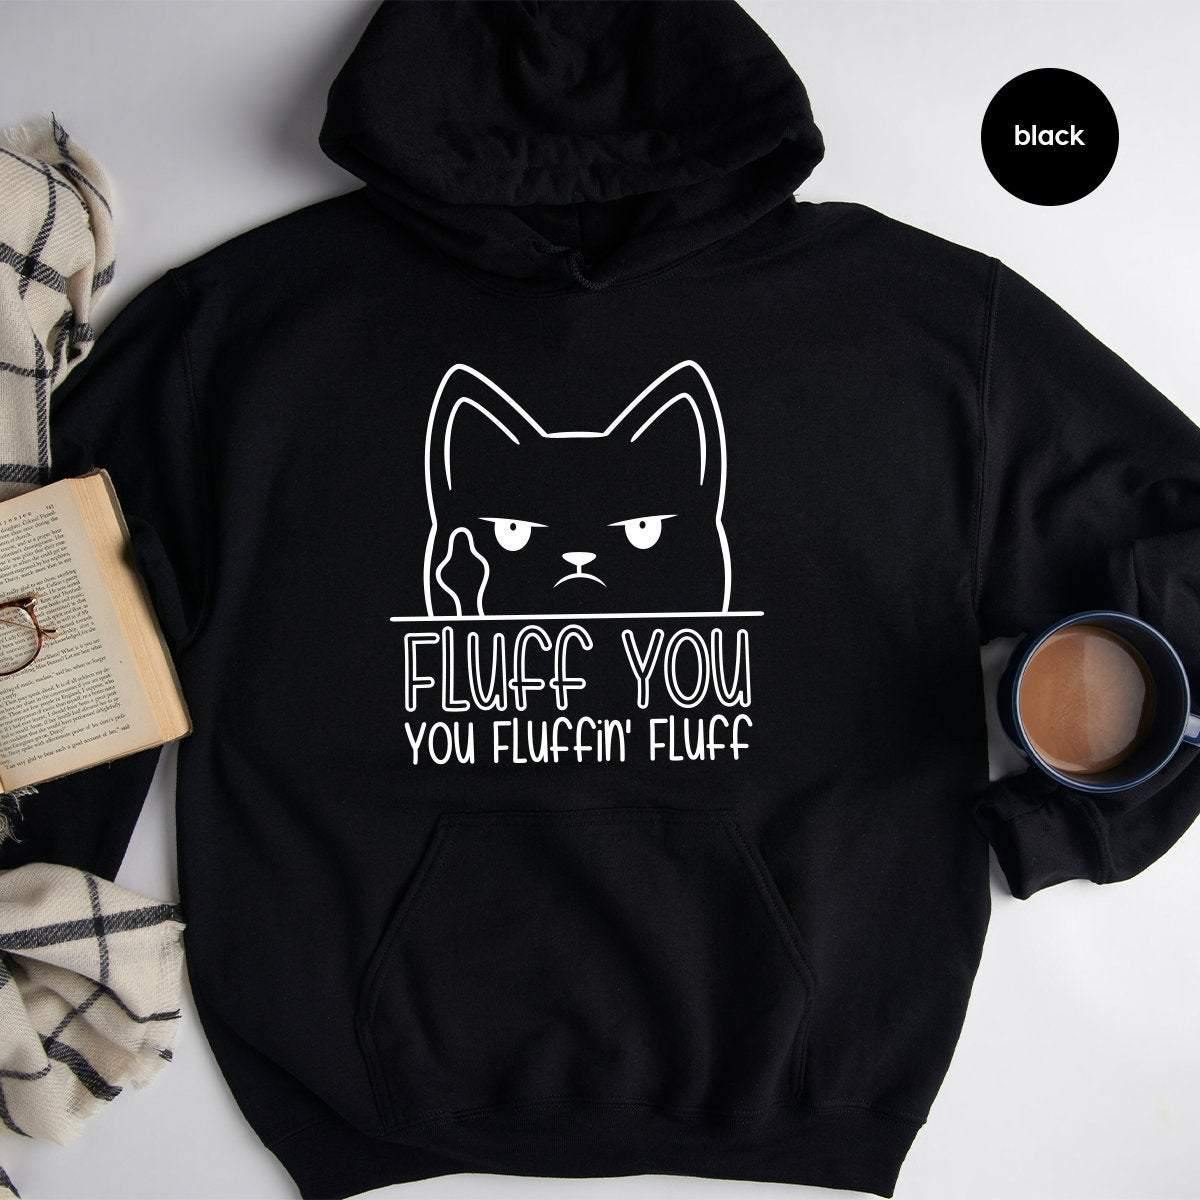 Funny Women Hoodies, Funny Cat Hoodie, Funny Saying Hoodie, Funny Sarcastic Hoodies, Humorous Hoodie, Fluff You You Fluffin Fluff Hoodies - Fastdeliverytees.com